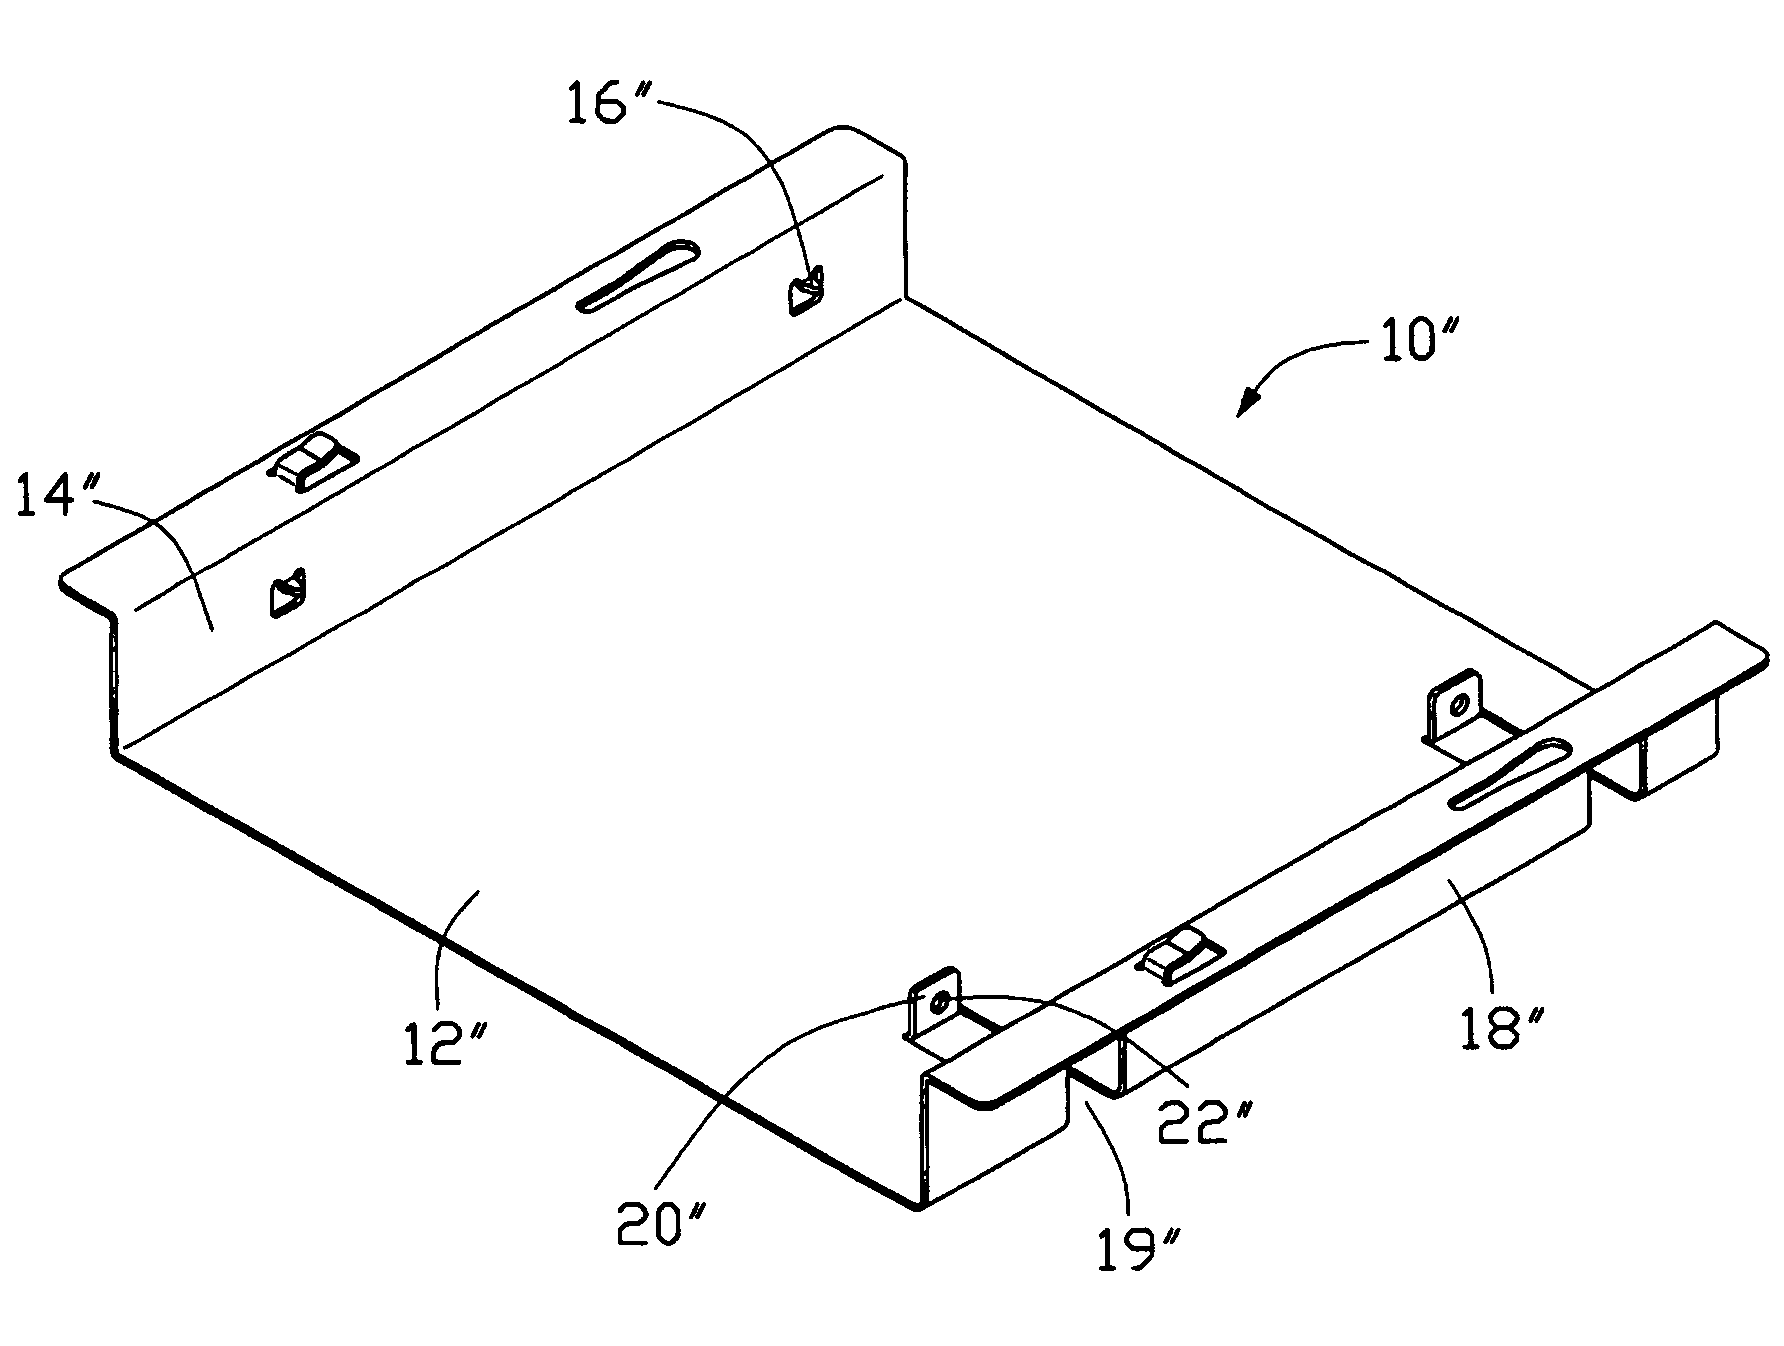 Mounting bracket for disk drive